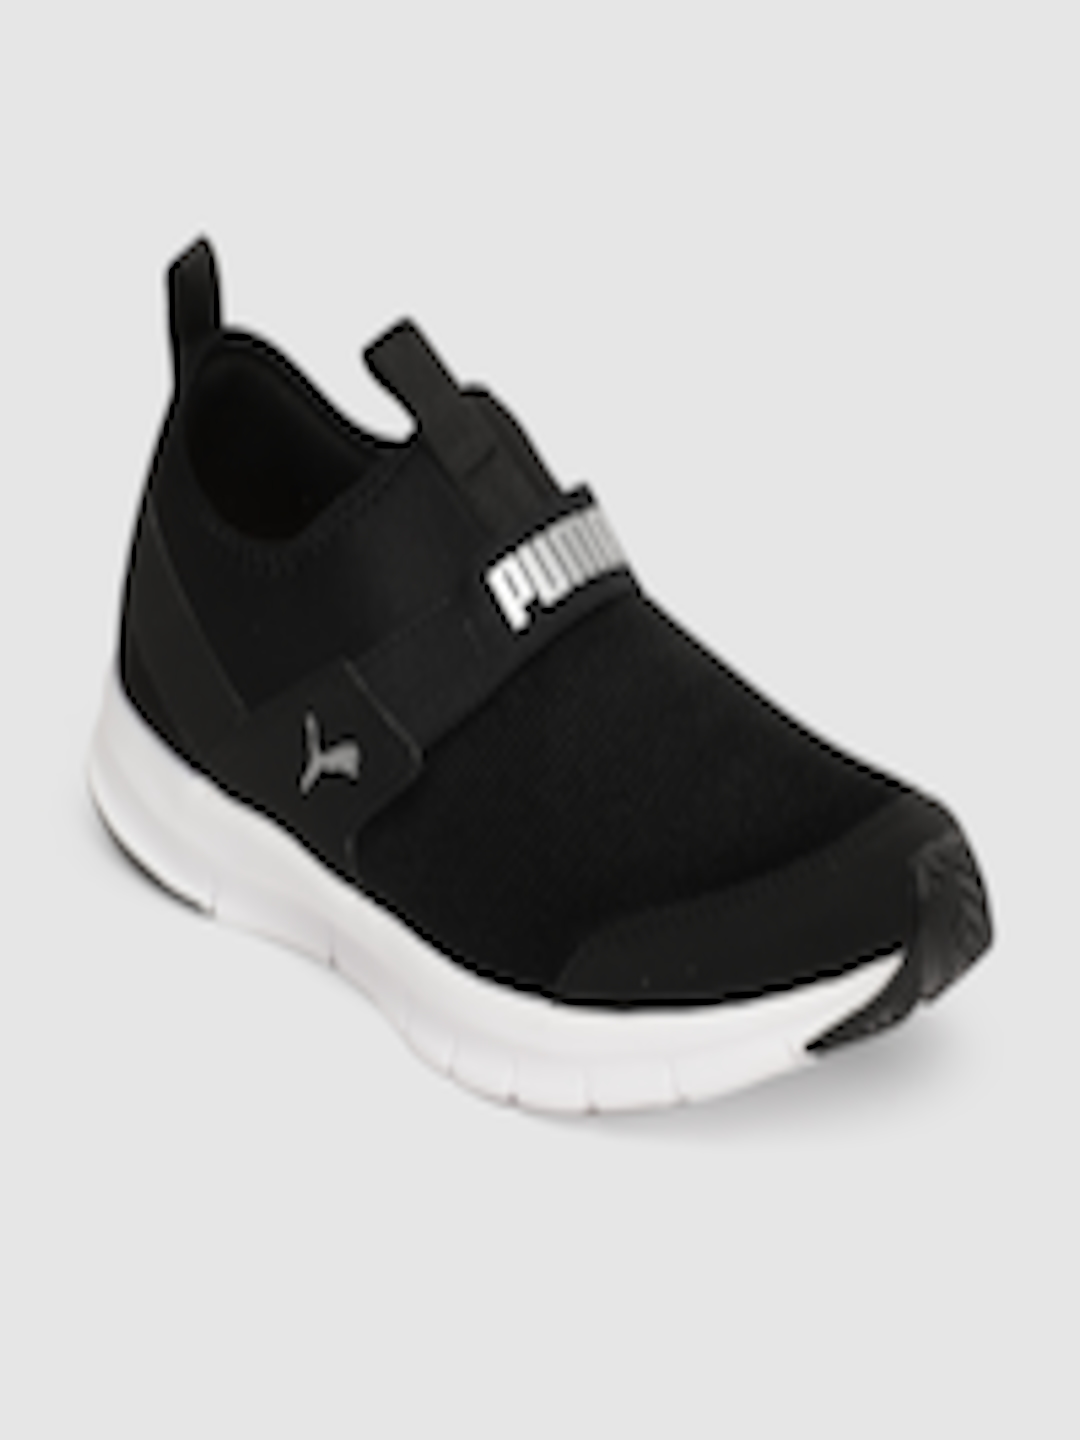 Buy Puma Men Black Solid Slip On Knit Walking Shoes - Sports Shoes for ...